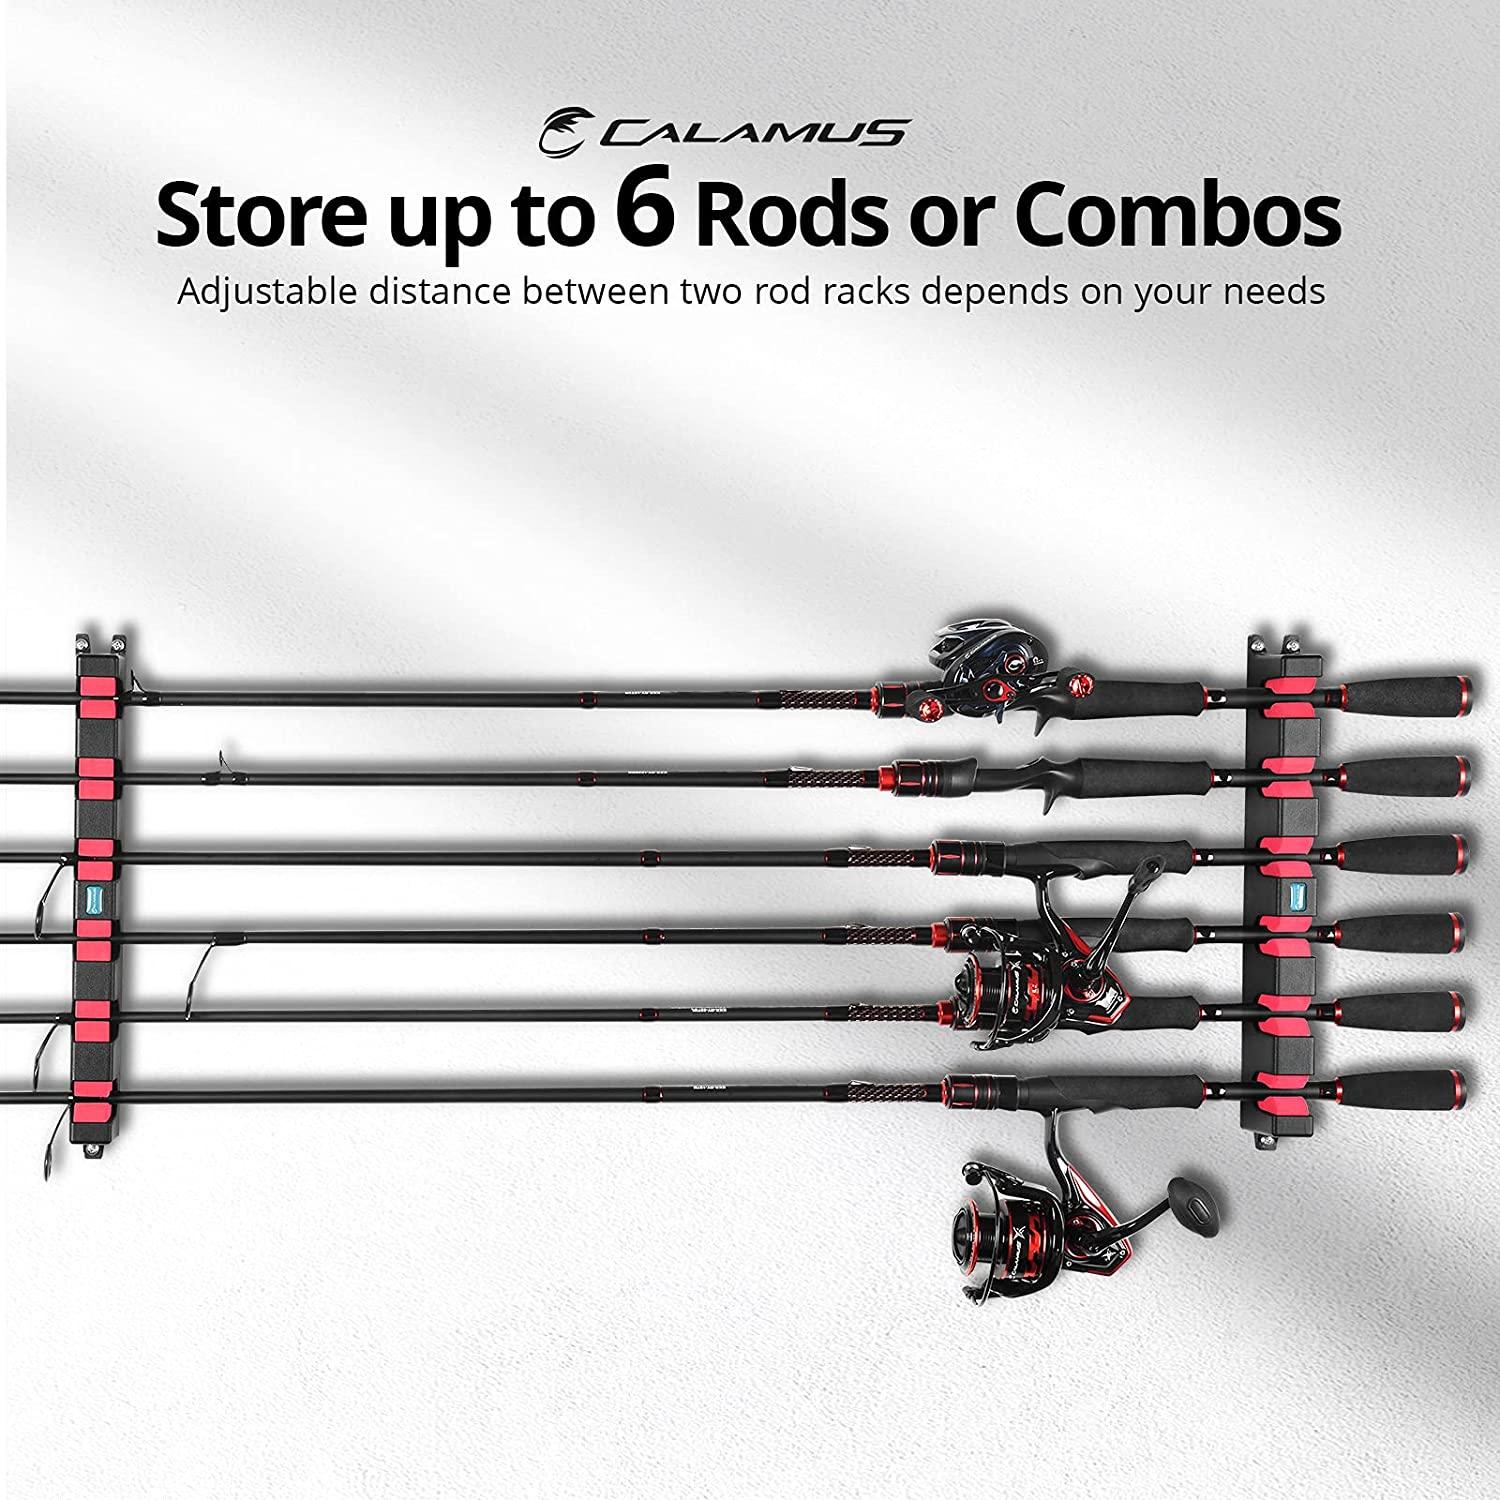 Wall Mount Fishing Rod Holders Vertical Wall Rod Rack Store Up To 6 Rods  ABS Fishing Pole Holder Wall Mount Storage Tools